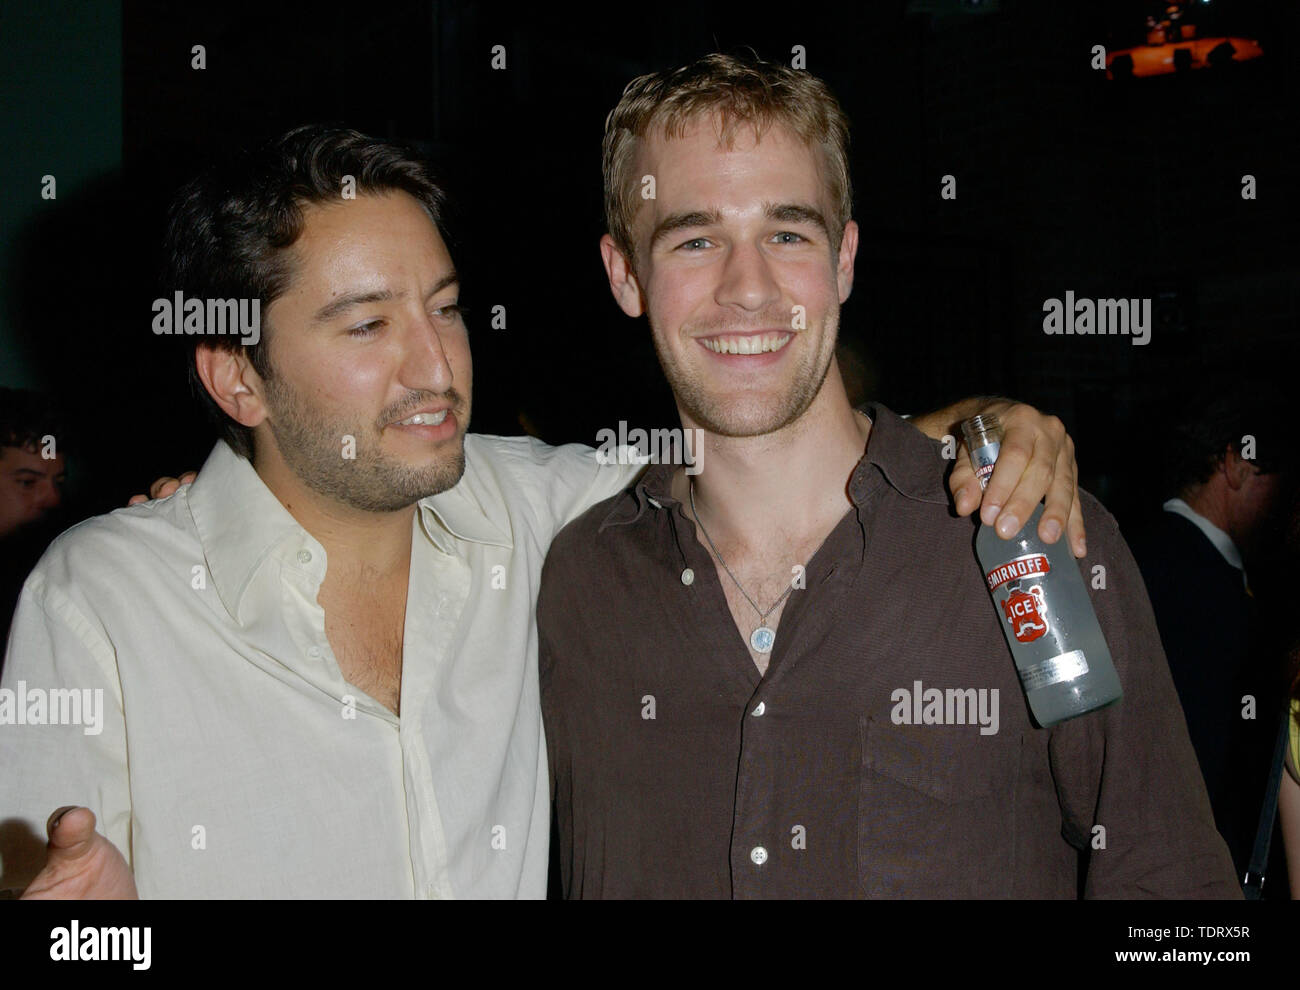 Oct 10, 2001; Los Angeles, CA, USA;  ! Actor JAMES VAN DER BEEK + producer GREG SHAPIRO @ the 'Rules of Attraction' wrap party @ The Knitting Factory Club Hollywood (Credit Image: © Chris Delmas/ZUMA Wire) Stock Photo